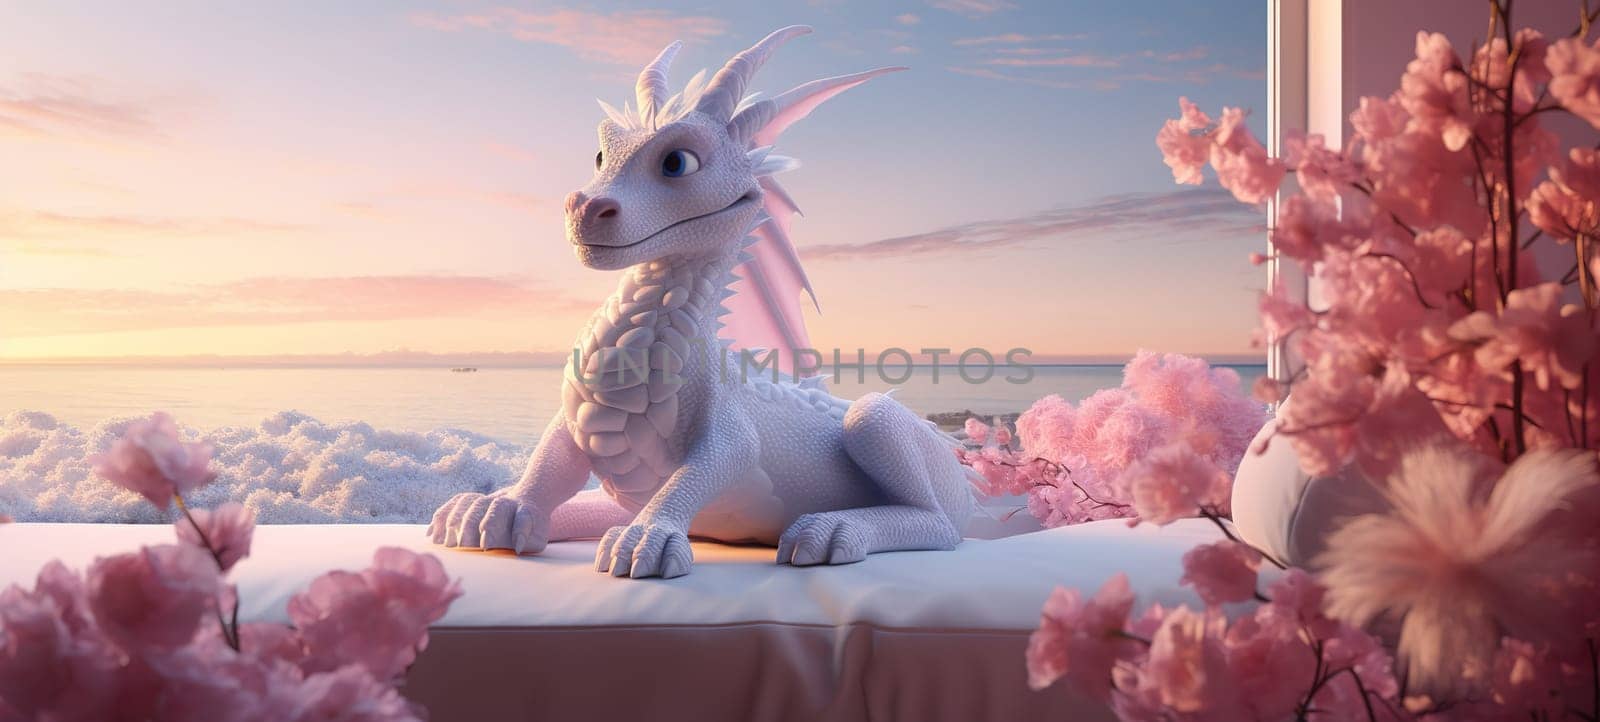 adorablwhite dragon sits on the sofa in front of the window, waits for the day to come by KaterinaDalemans